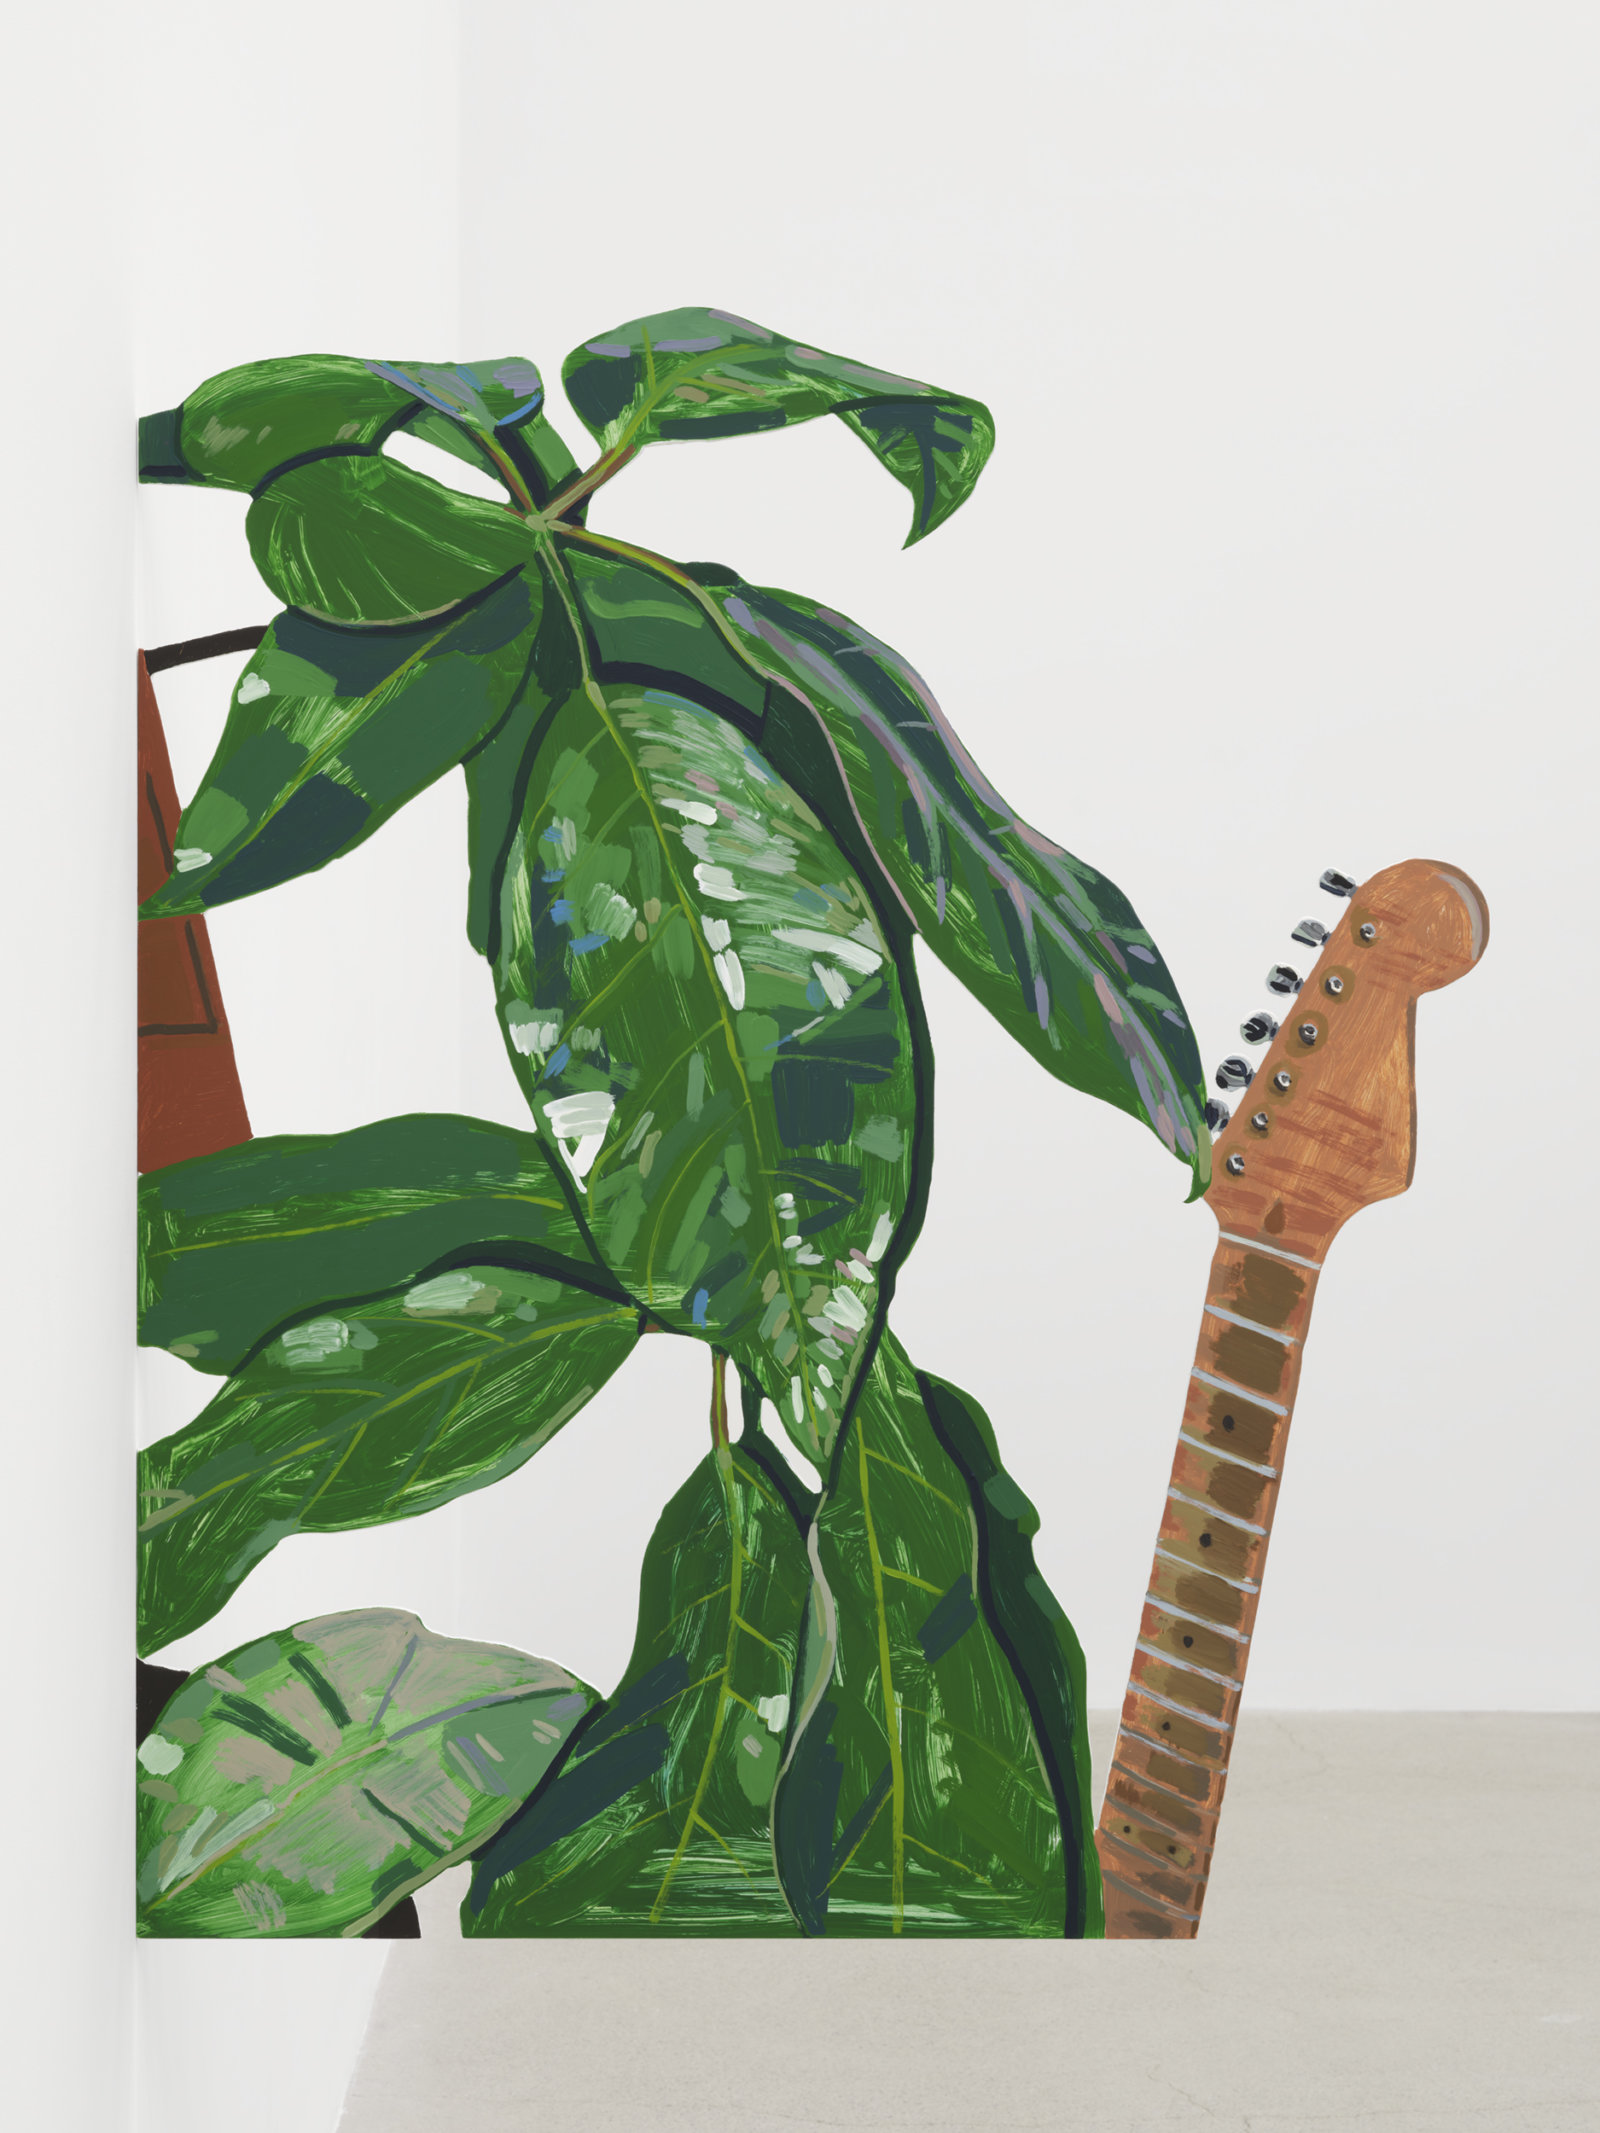 Damian Moppett, Plant and Guitar, 2023, oil and enamel on aluminum, 47 x 39 in. (119 x 98 cm)